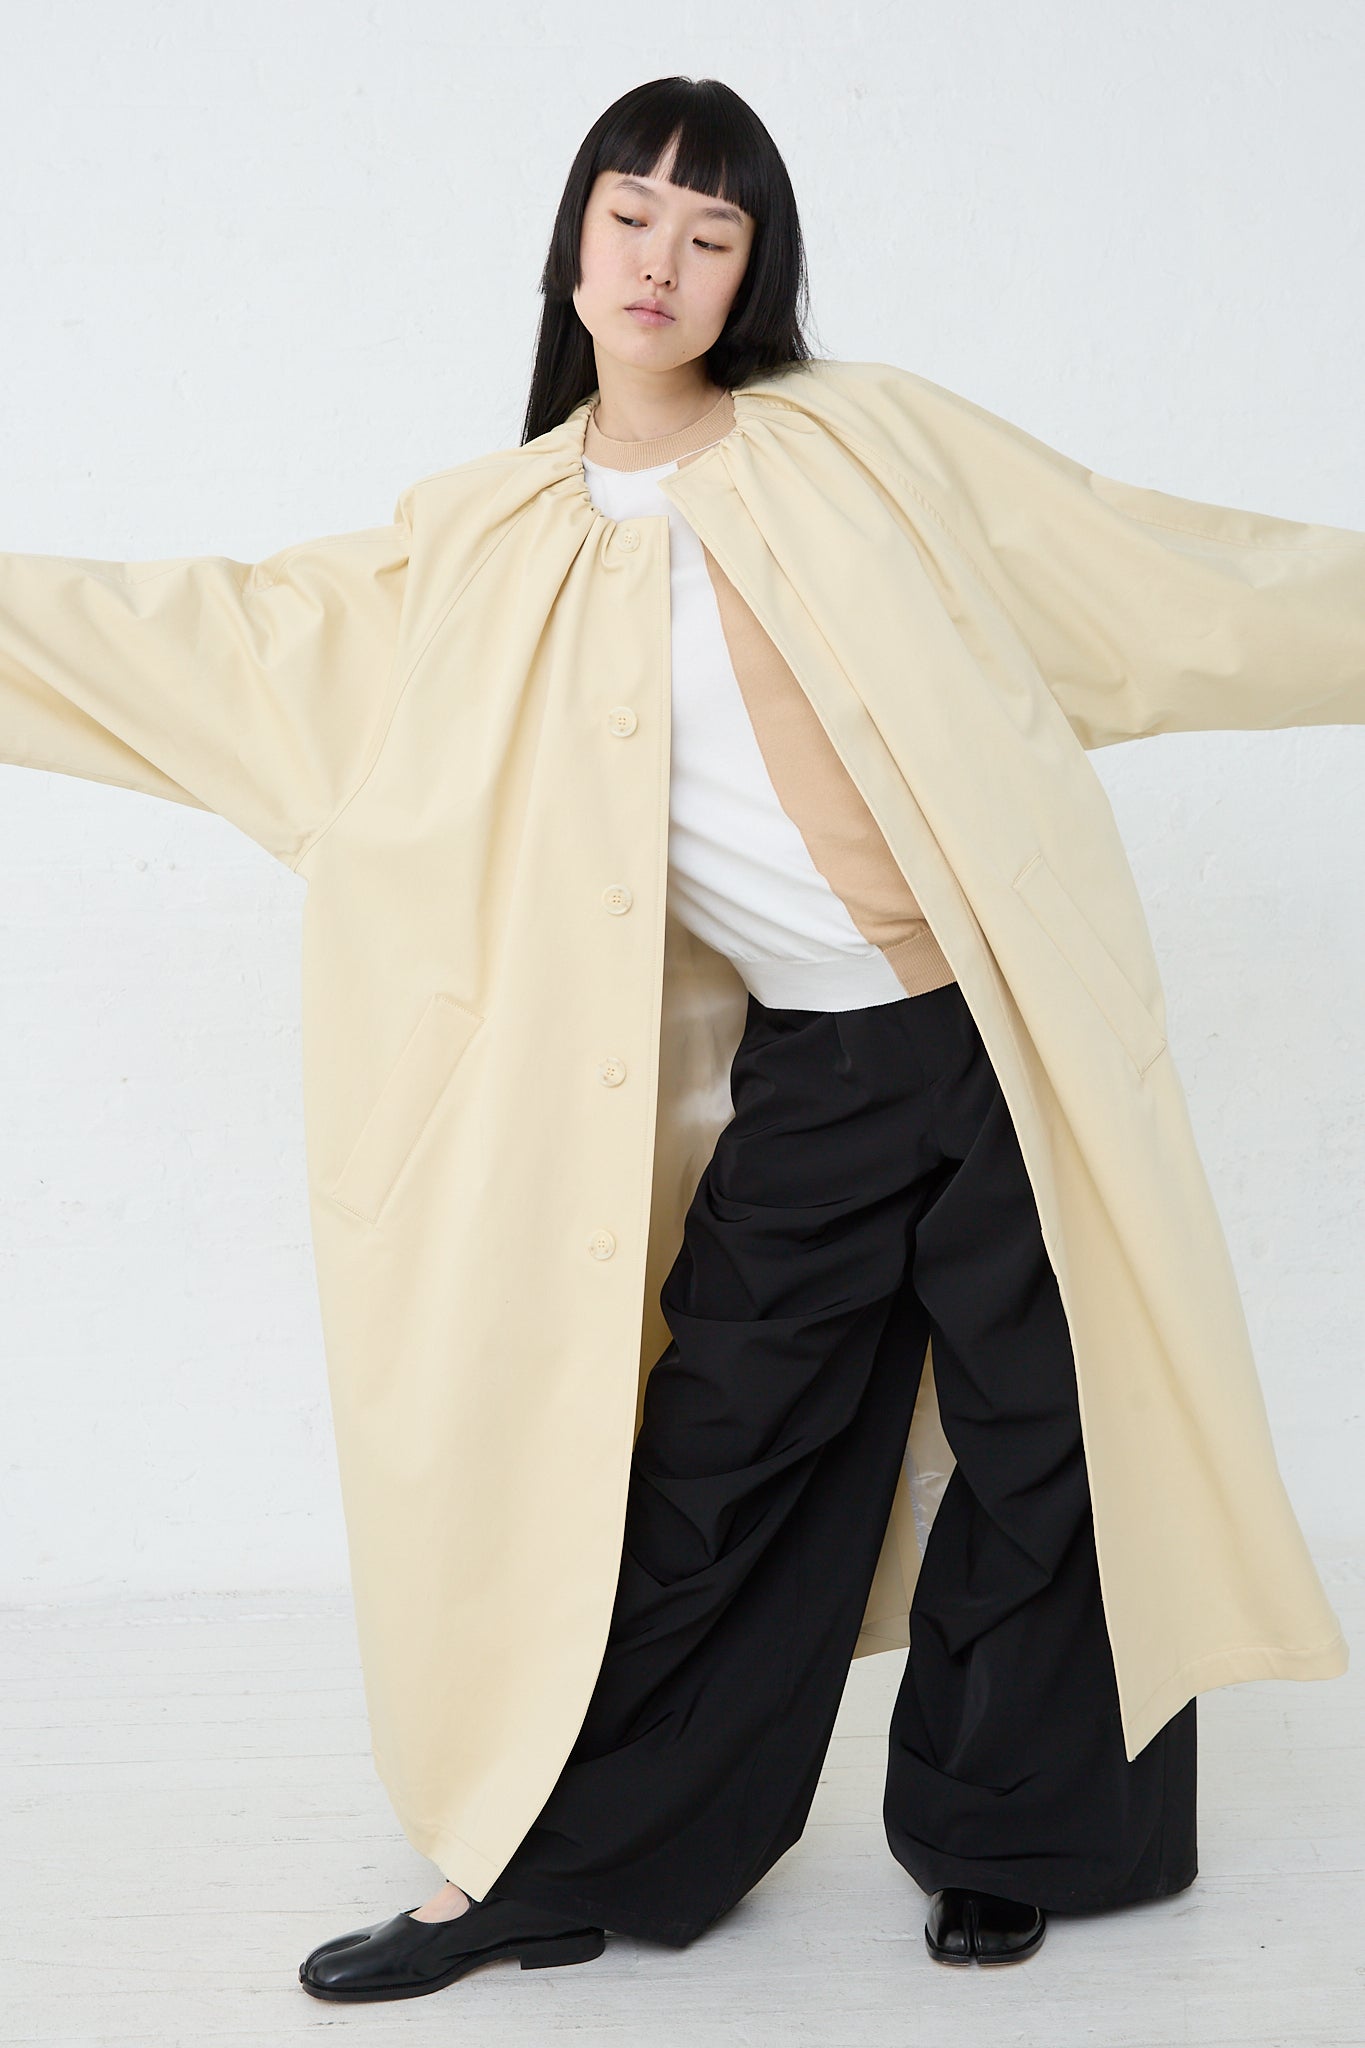 A woman wearing an MM6 Trench Coat in Pale Yellow made of pale yellow cotton twill.